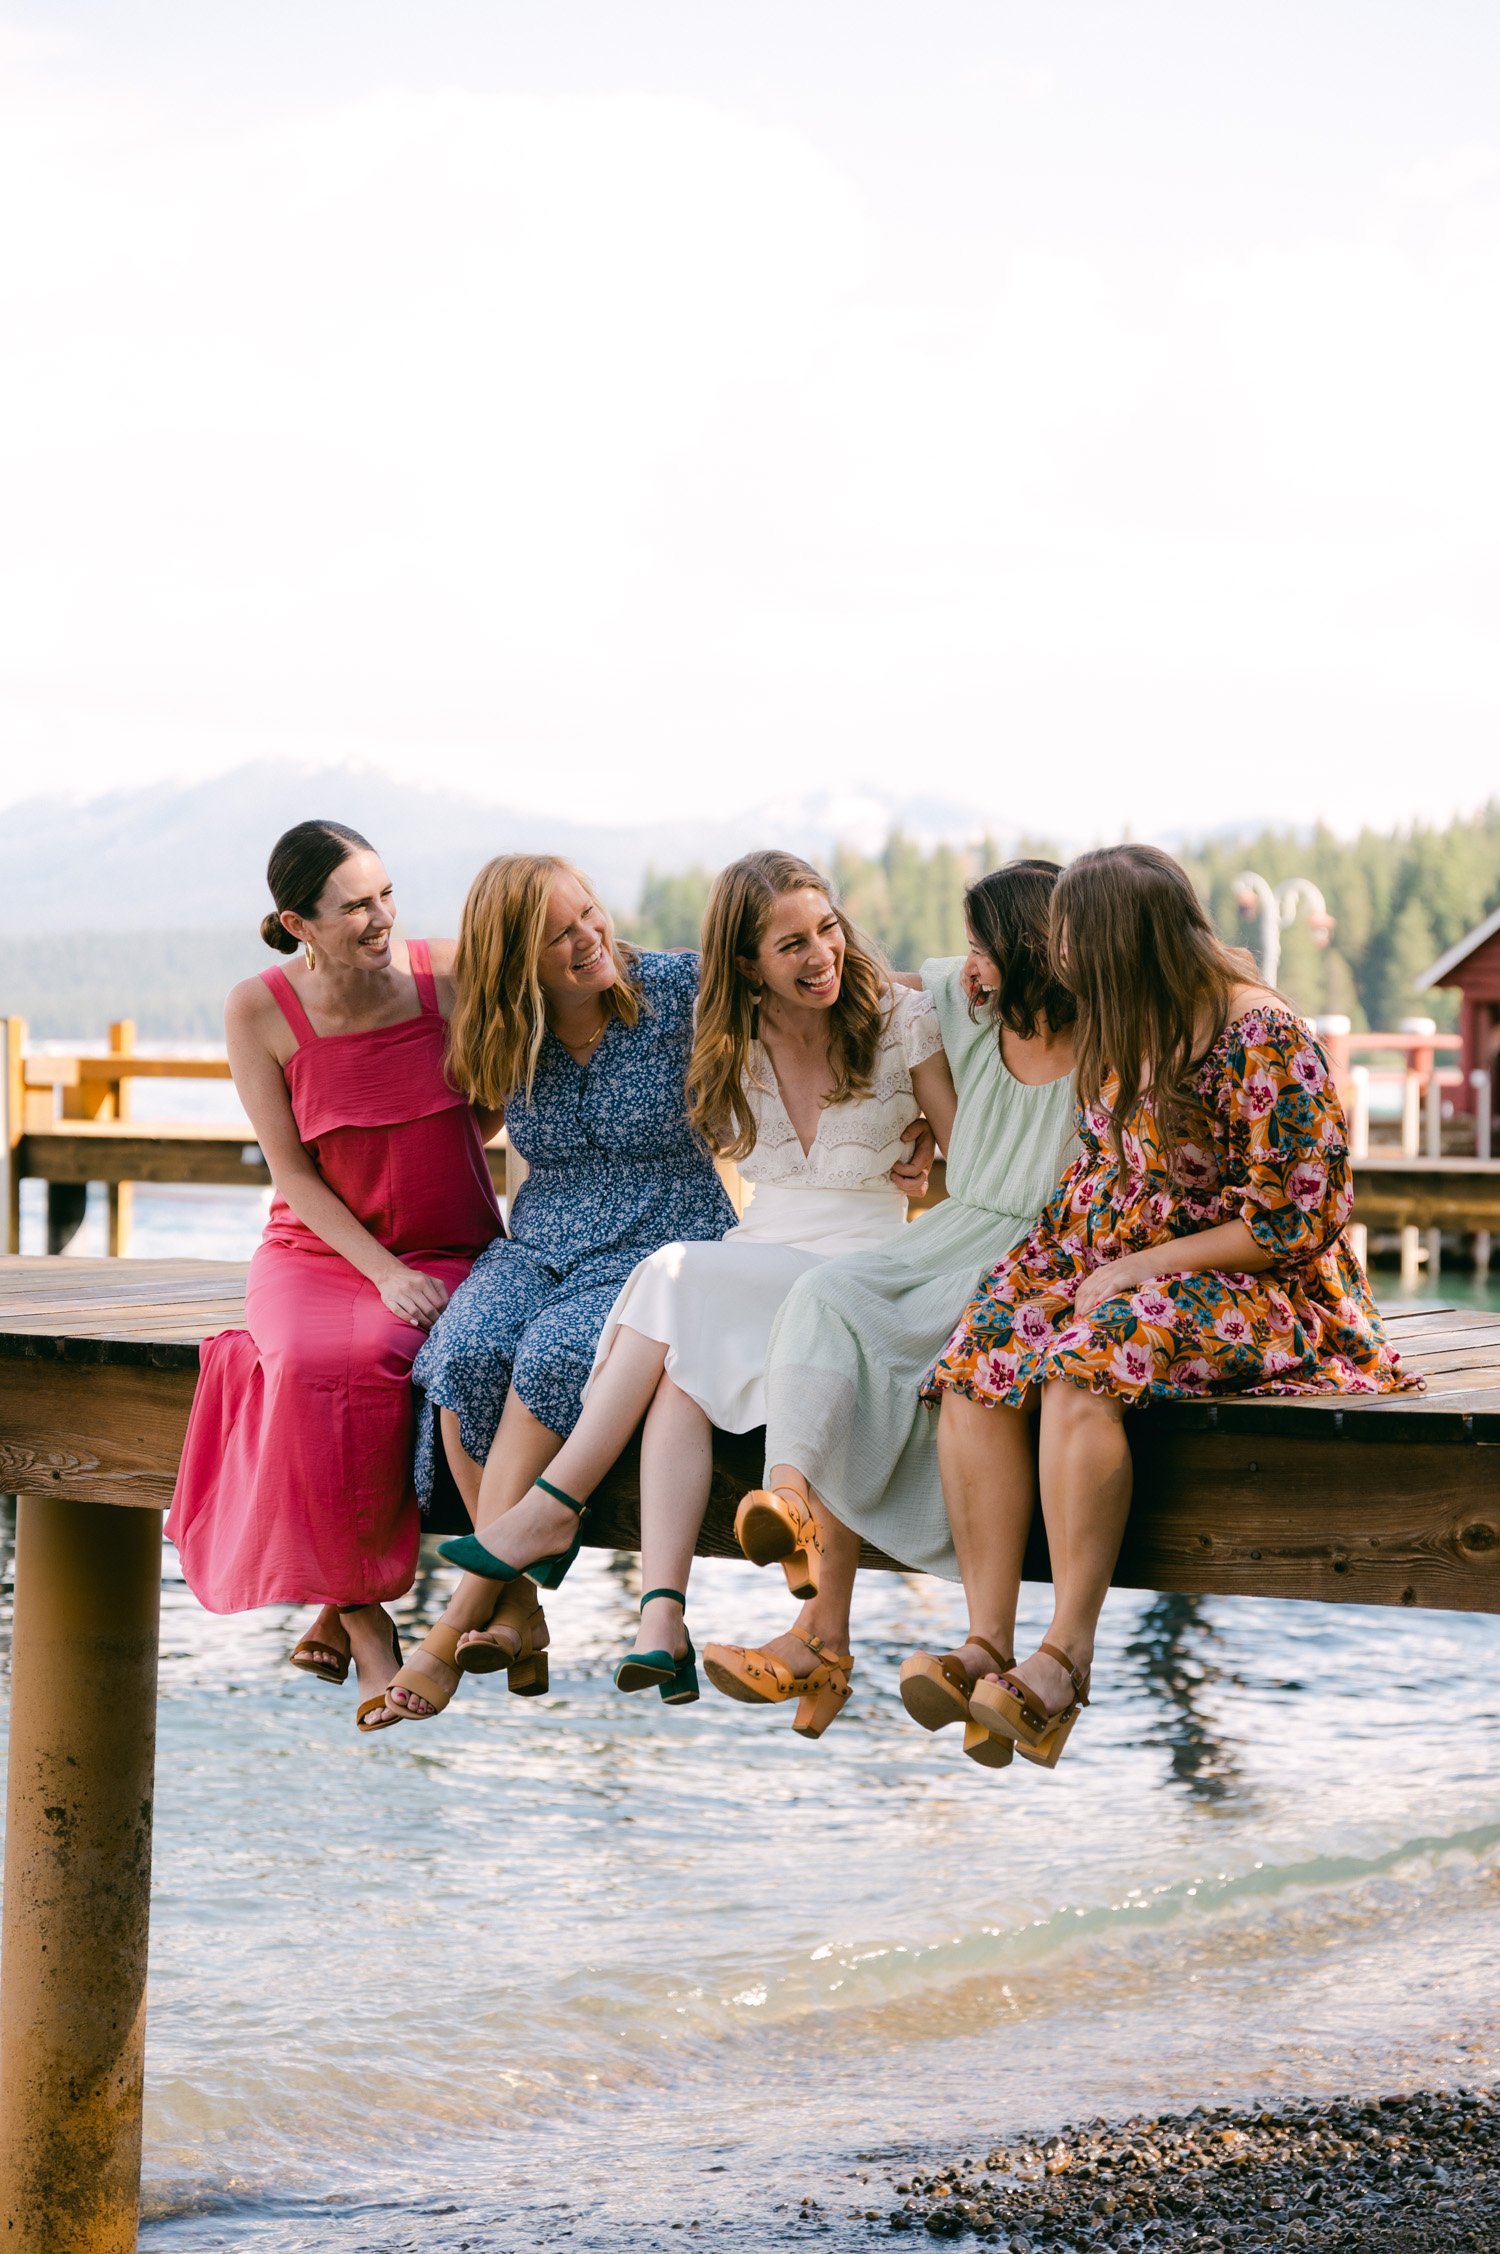 Best Day Ever - Lake Tahoe Wedding Photographer BlogWest Shore Private ...